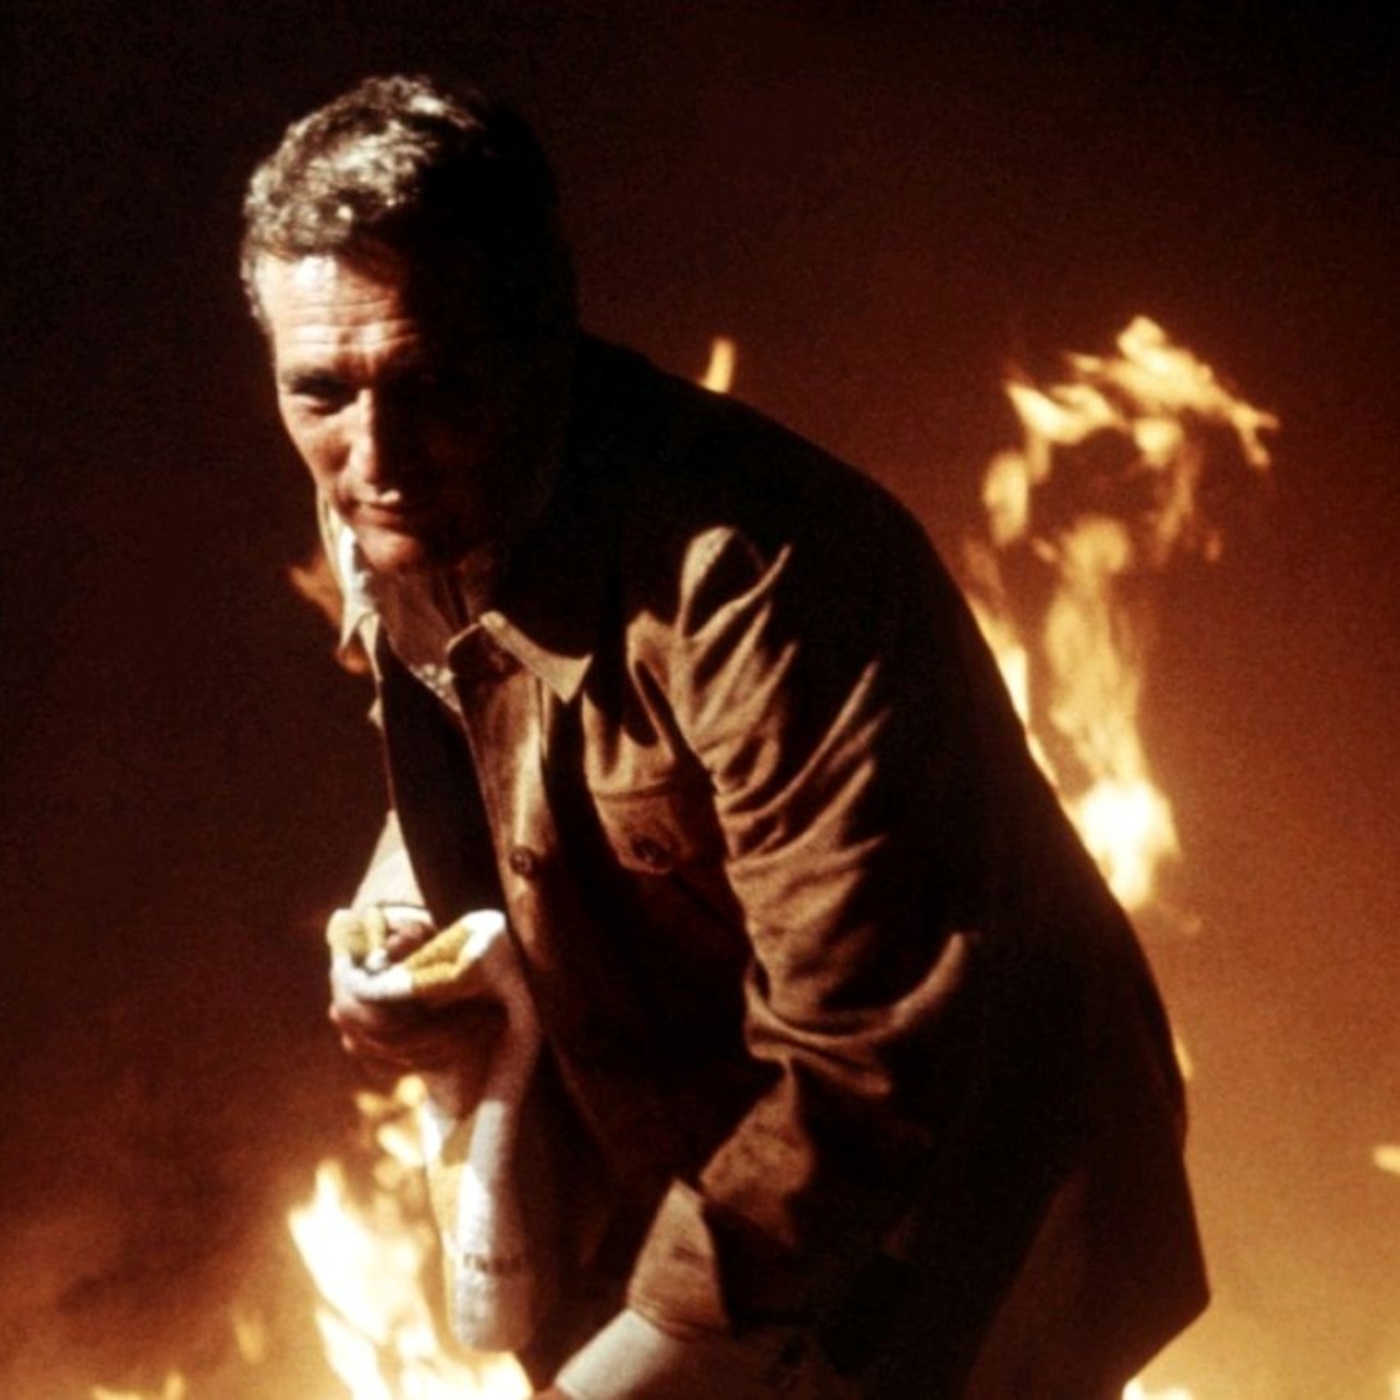 The Making of The Towering Inferno